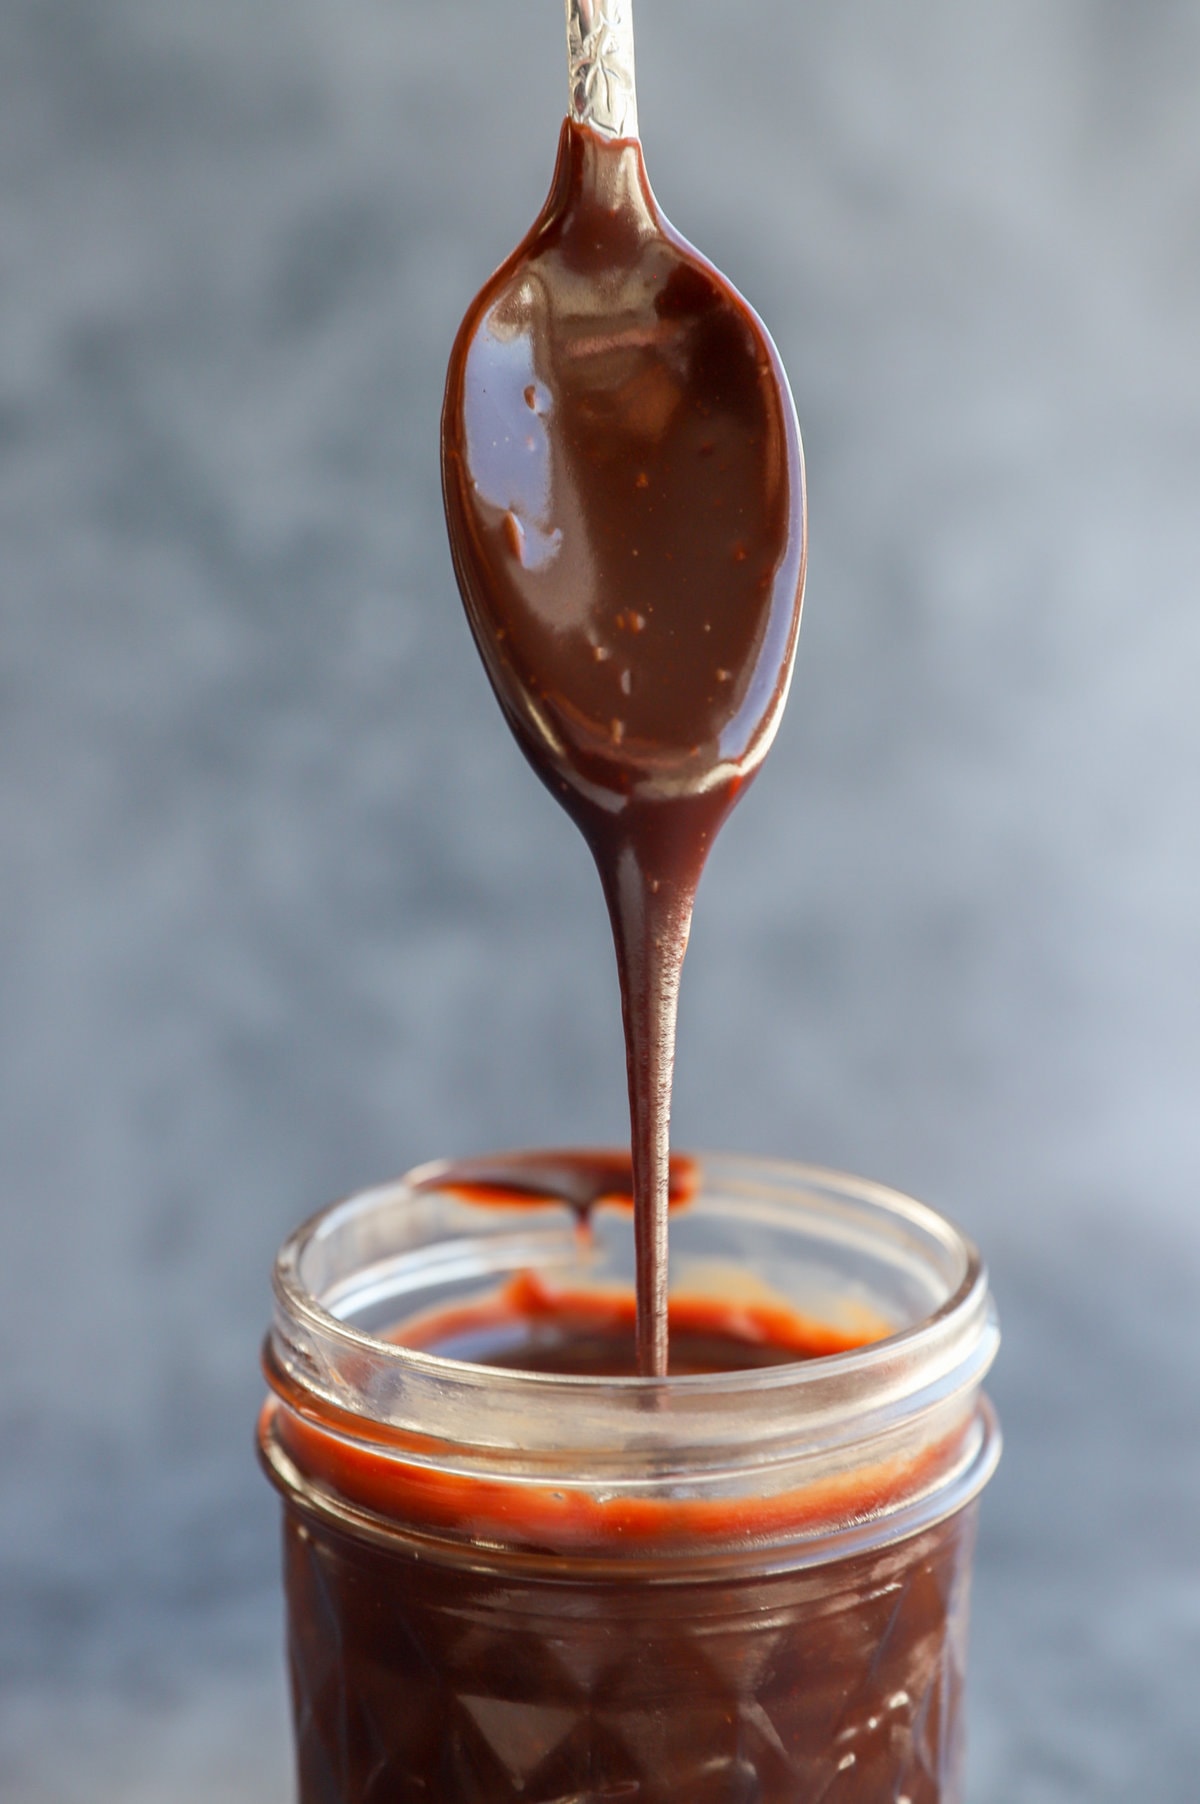 drizzling chocolate sauce into a jar image